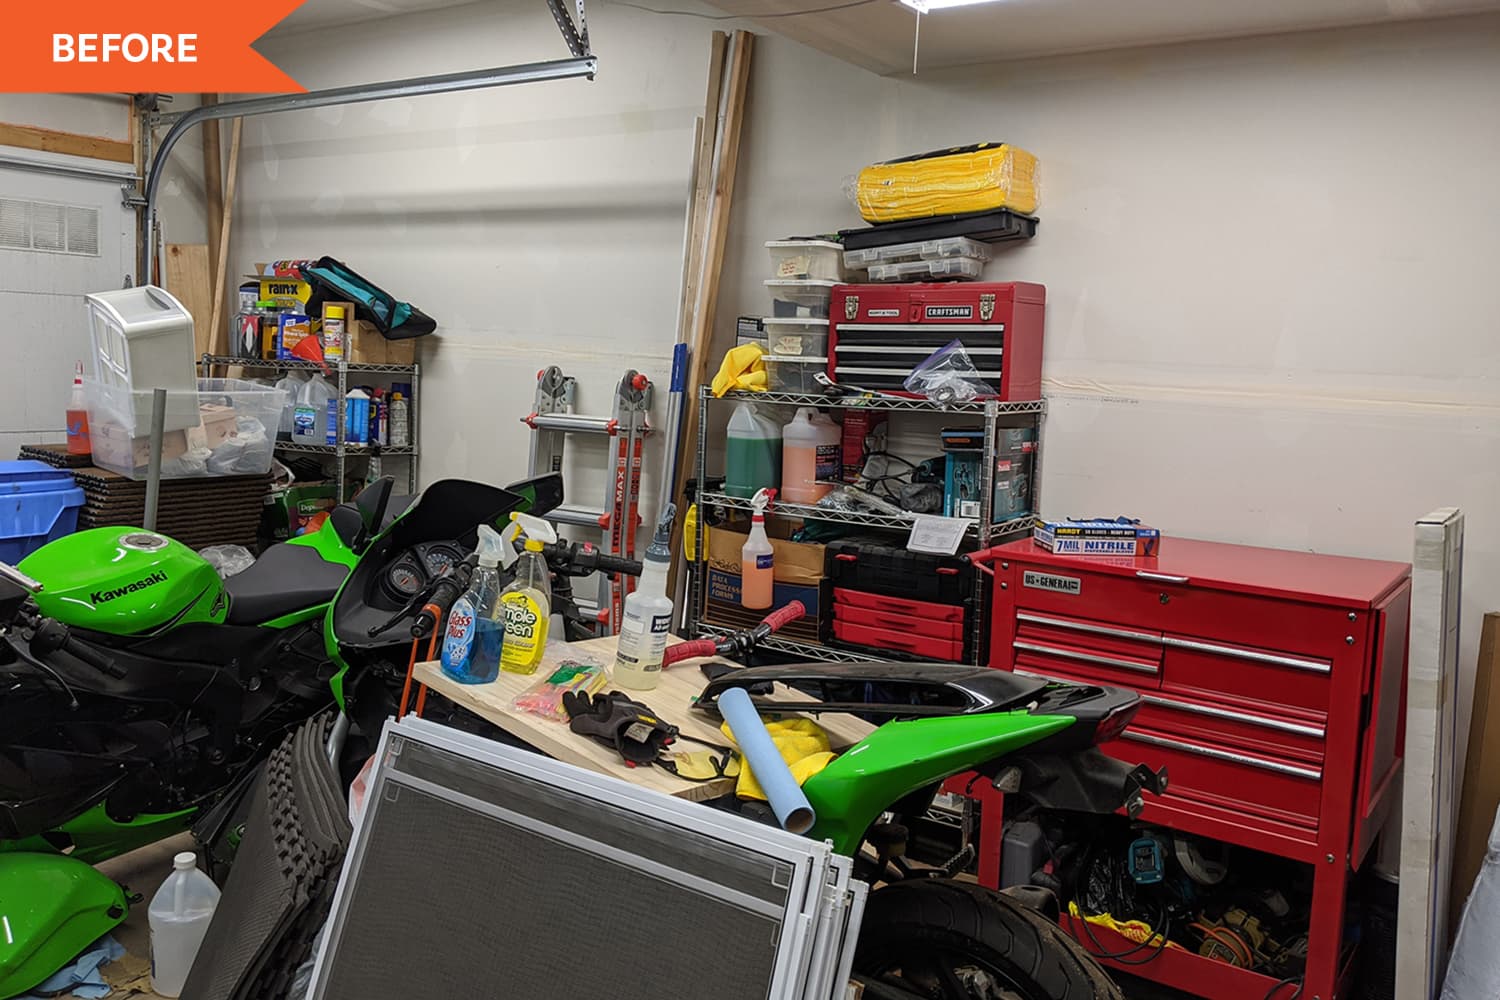 Before and After: A $600 IKEA Solution Is the Star of This Garage Transformation